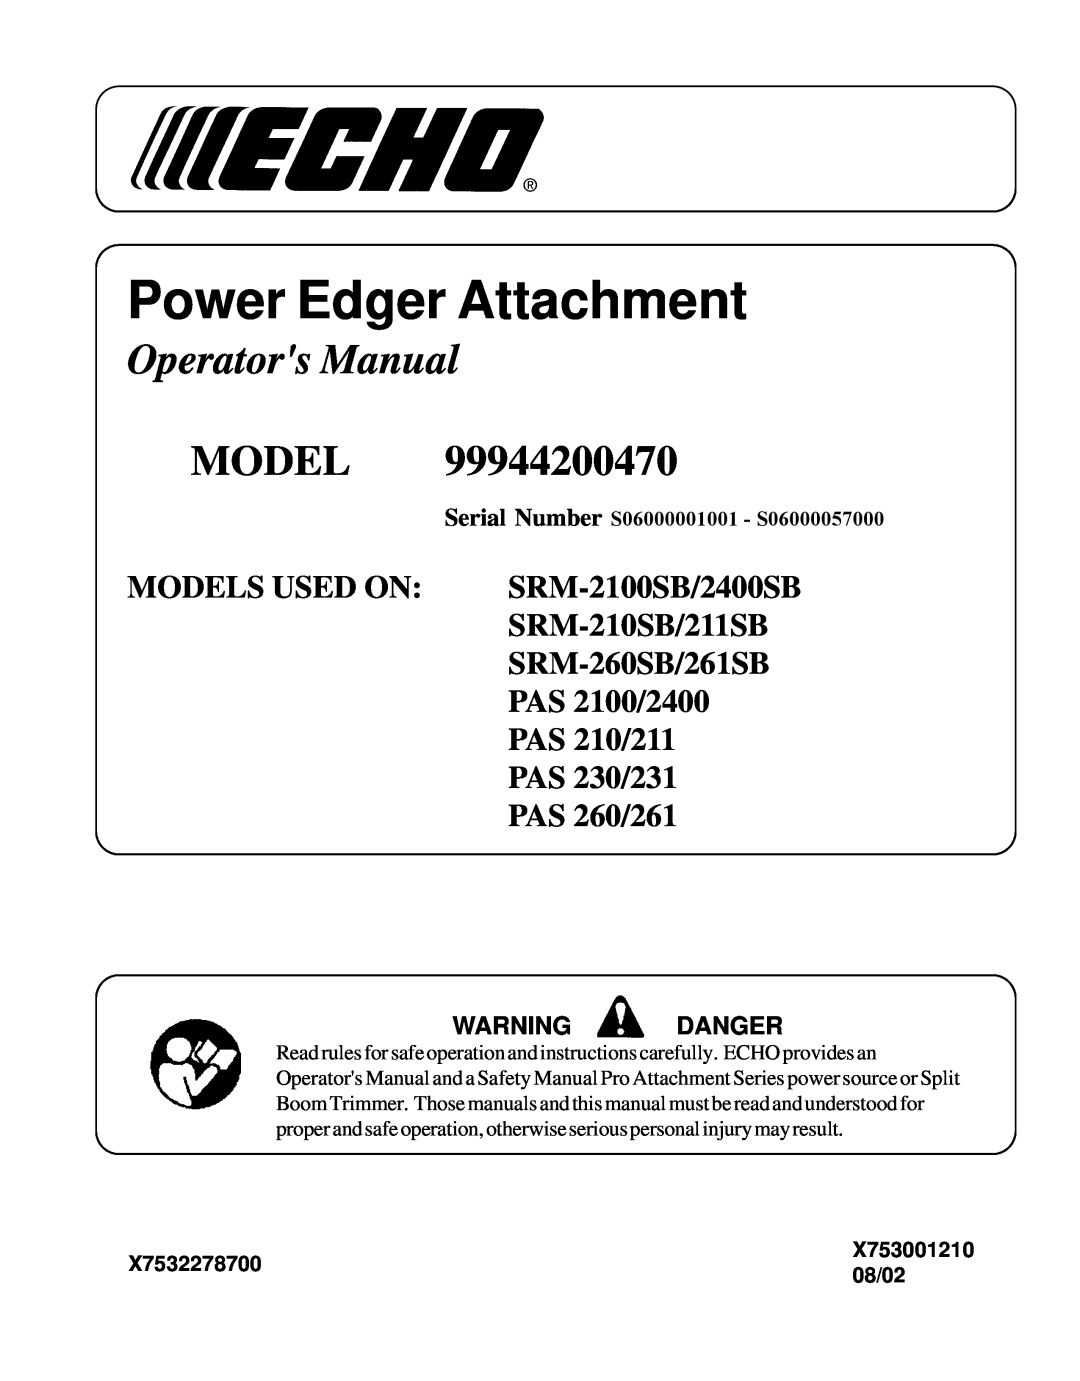 Echo 99944200470 specifications Operator’s Manual, Power Edger Attachment 